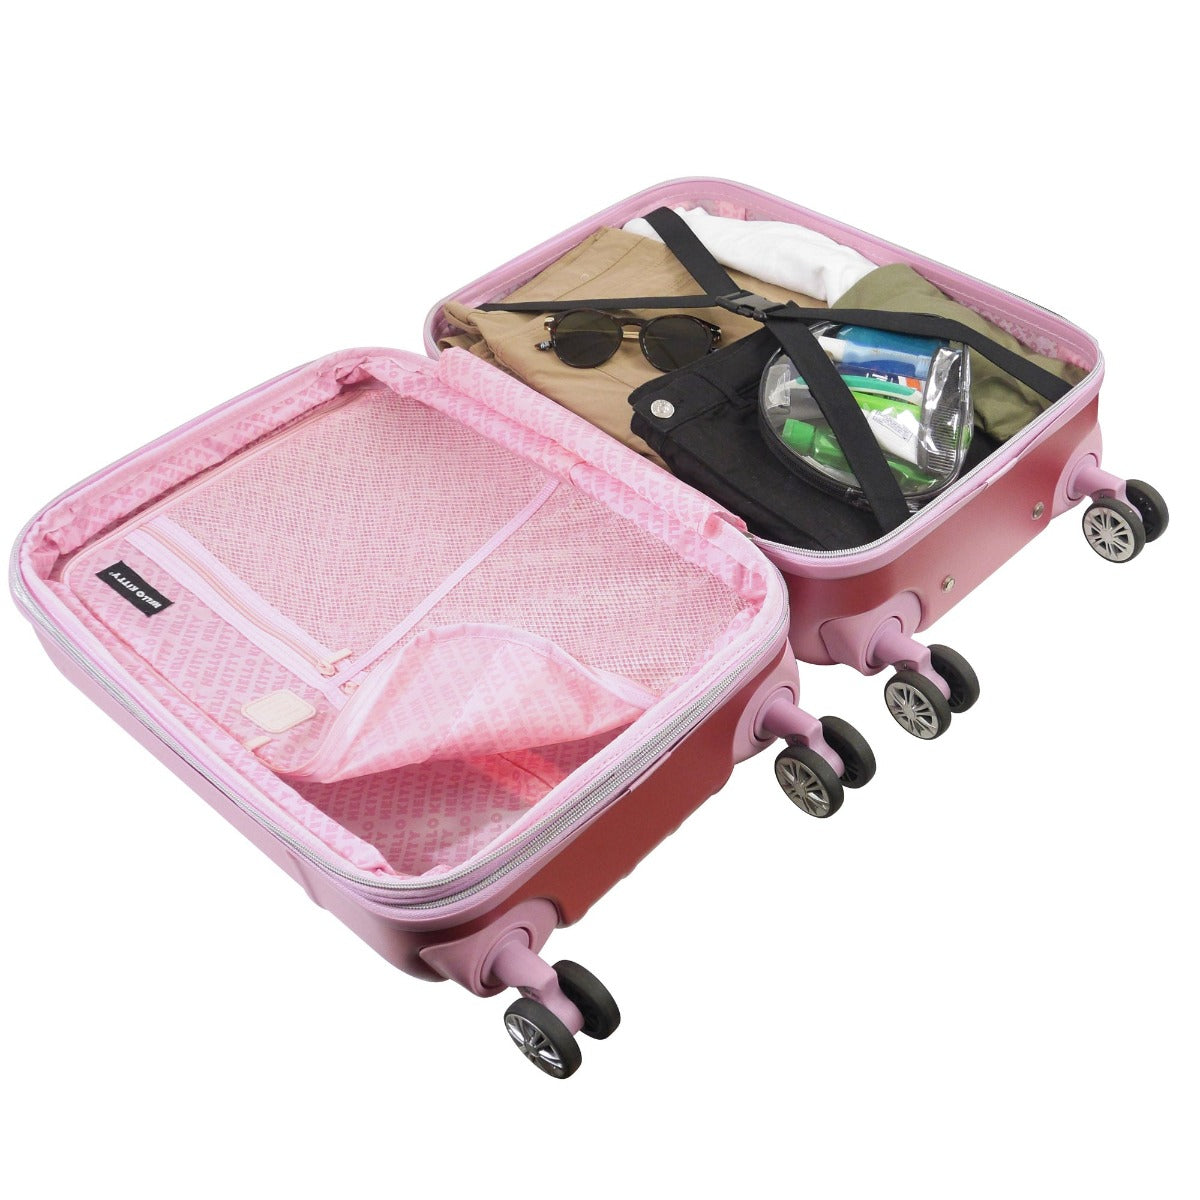 Hello Kitty x Ful 21" hard-sided spinner rolling carry-on luggage suitcase pink